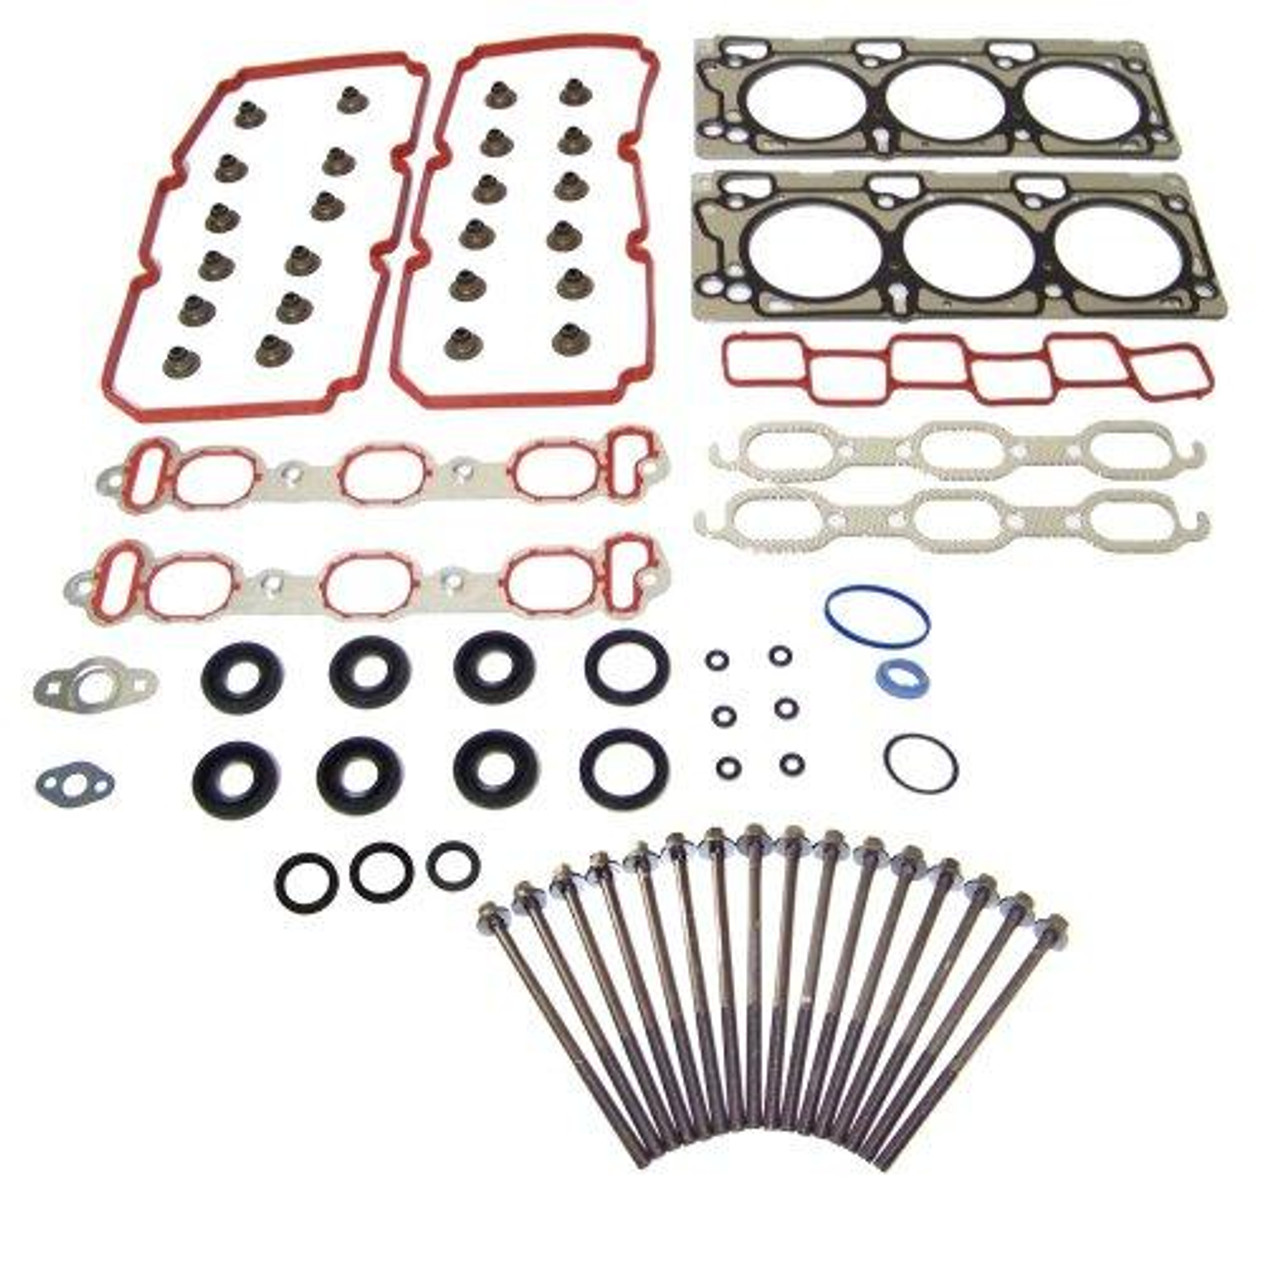 Head Gasket Set with Head Bolt Kit - 2008 Chrysler Pacifica 4.0L Engine Parts # HGB1158ZE2